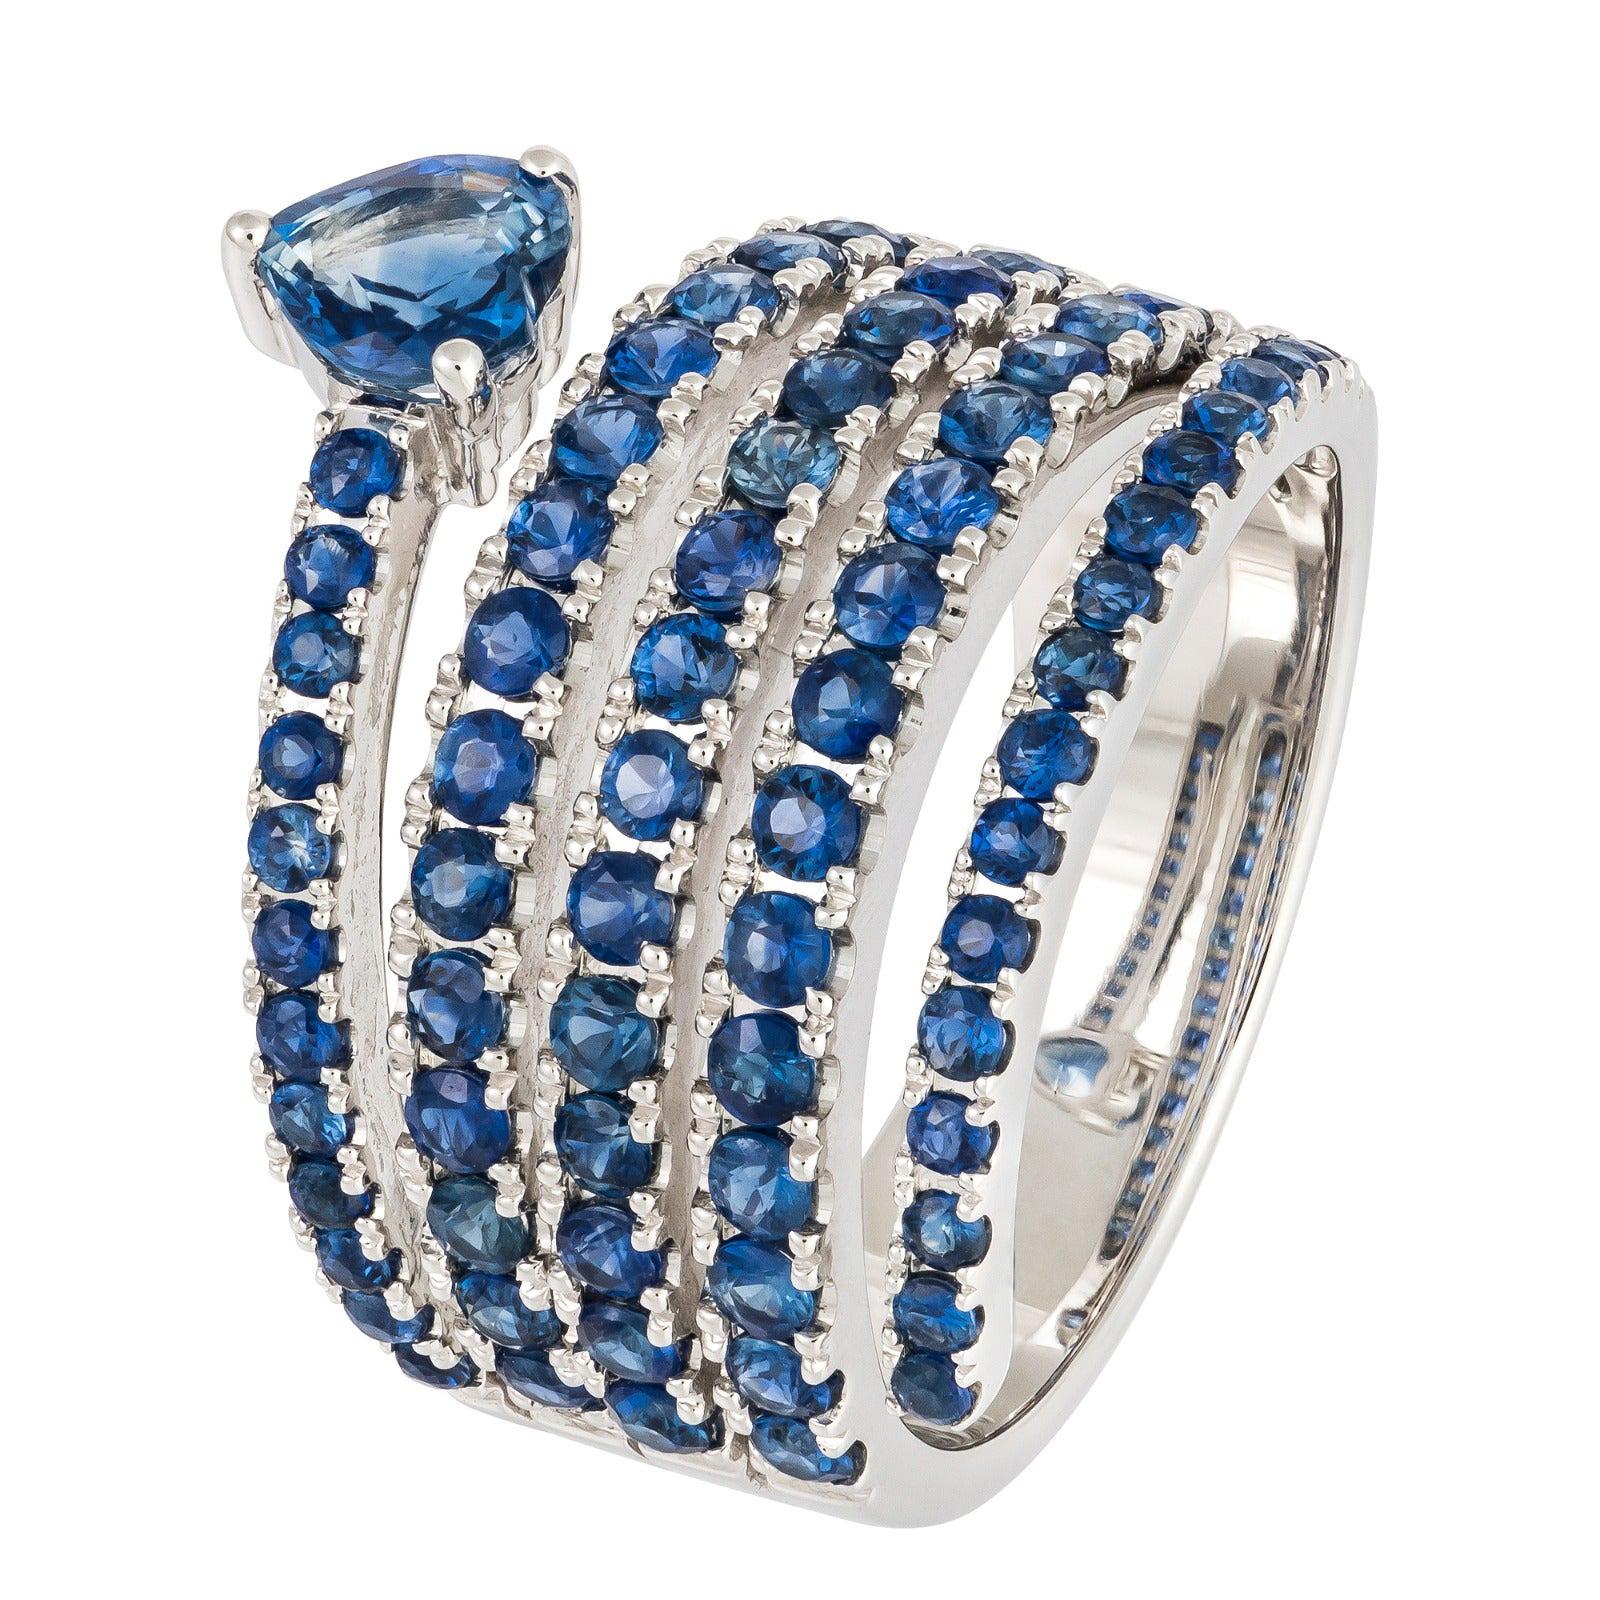 Fashionable and Stylish Blue Sapphire White Gold Statement Ring for Her